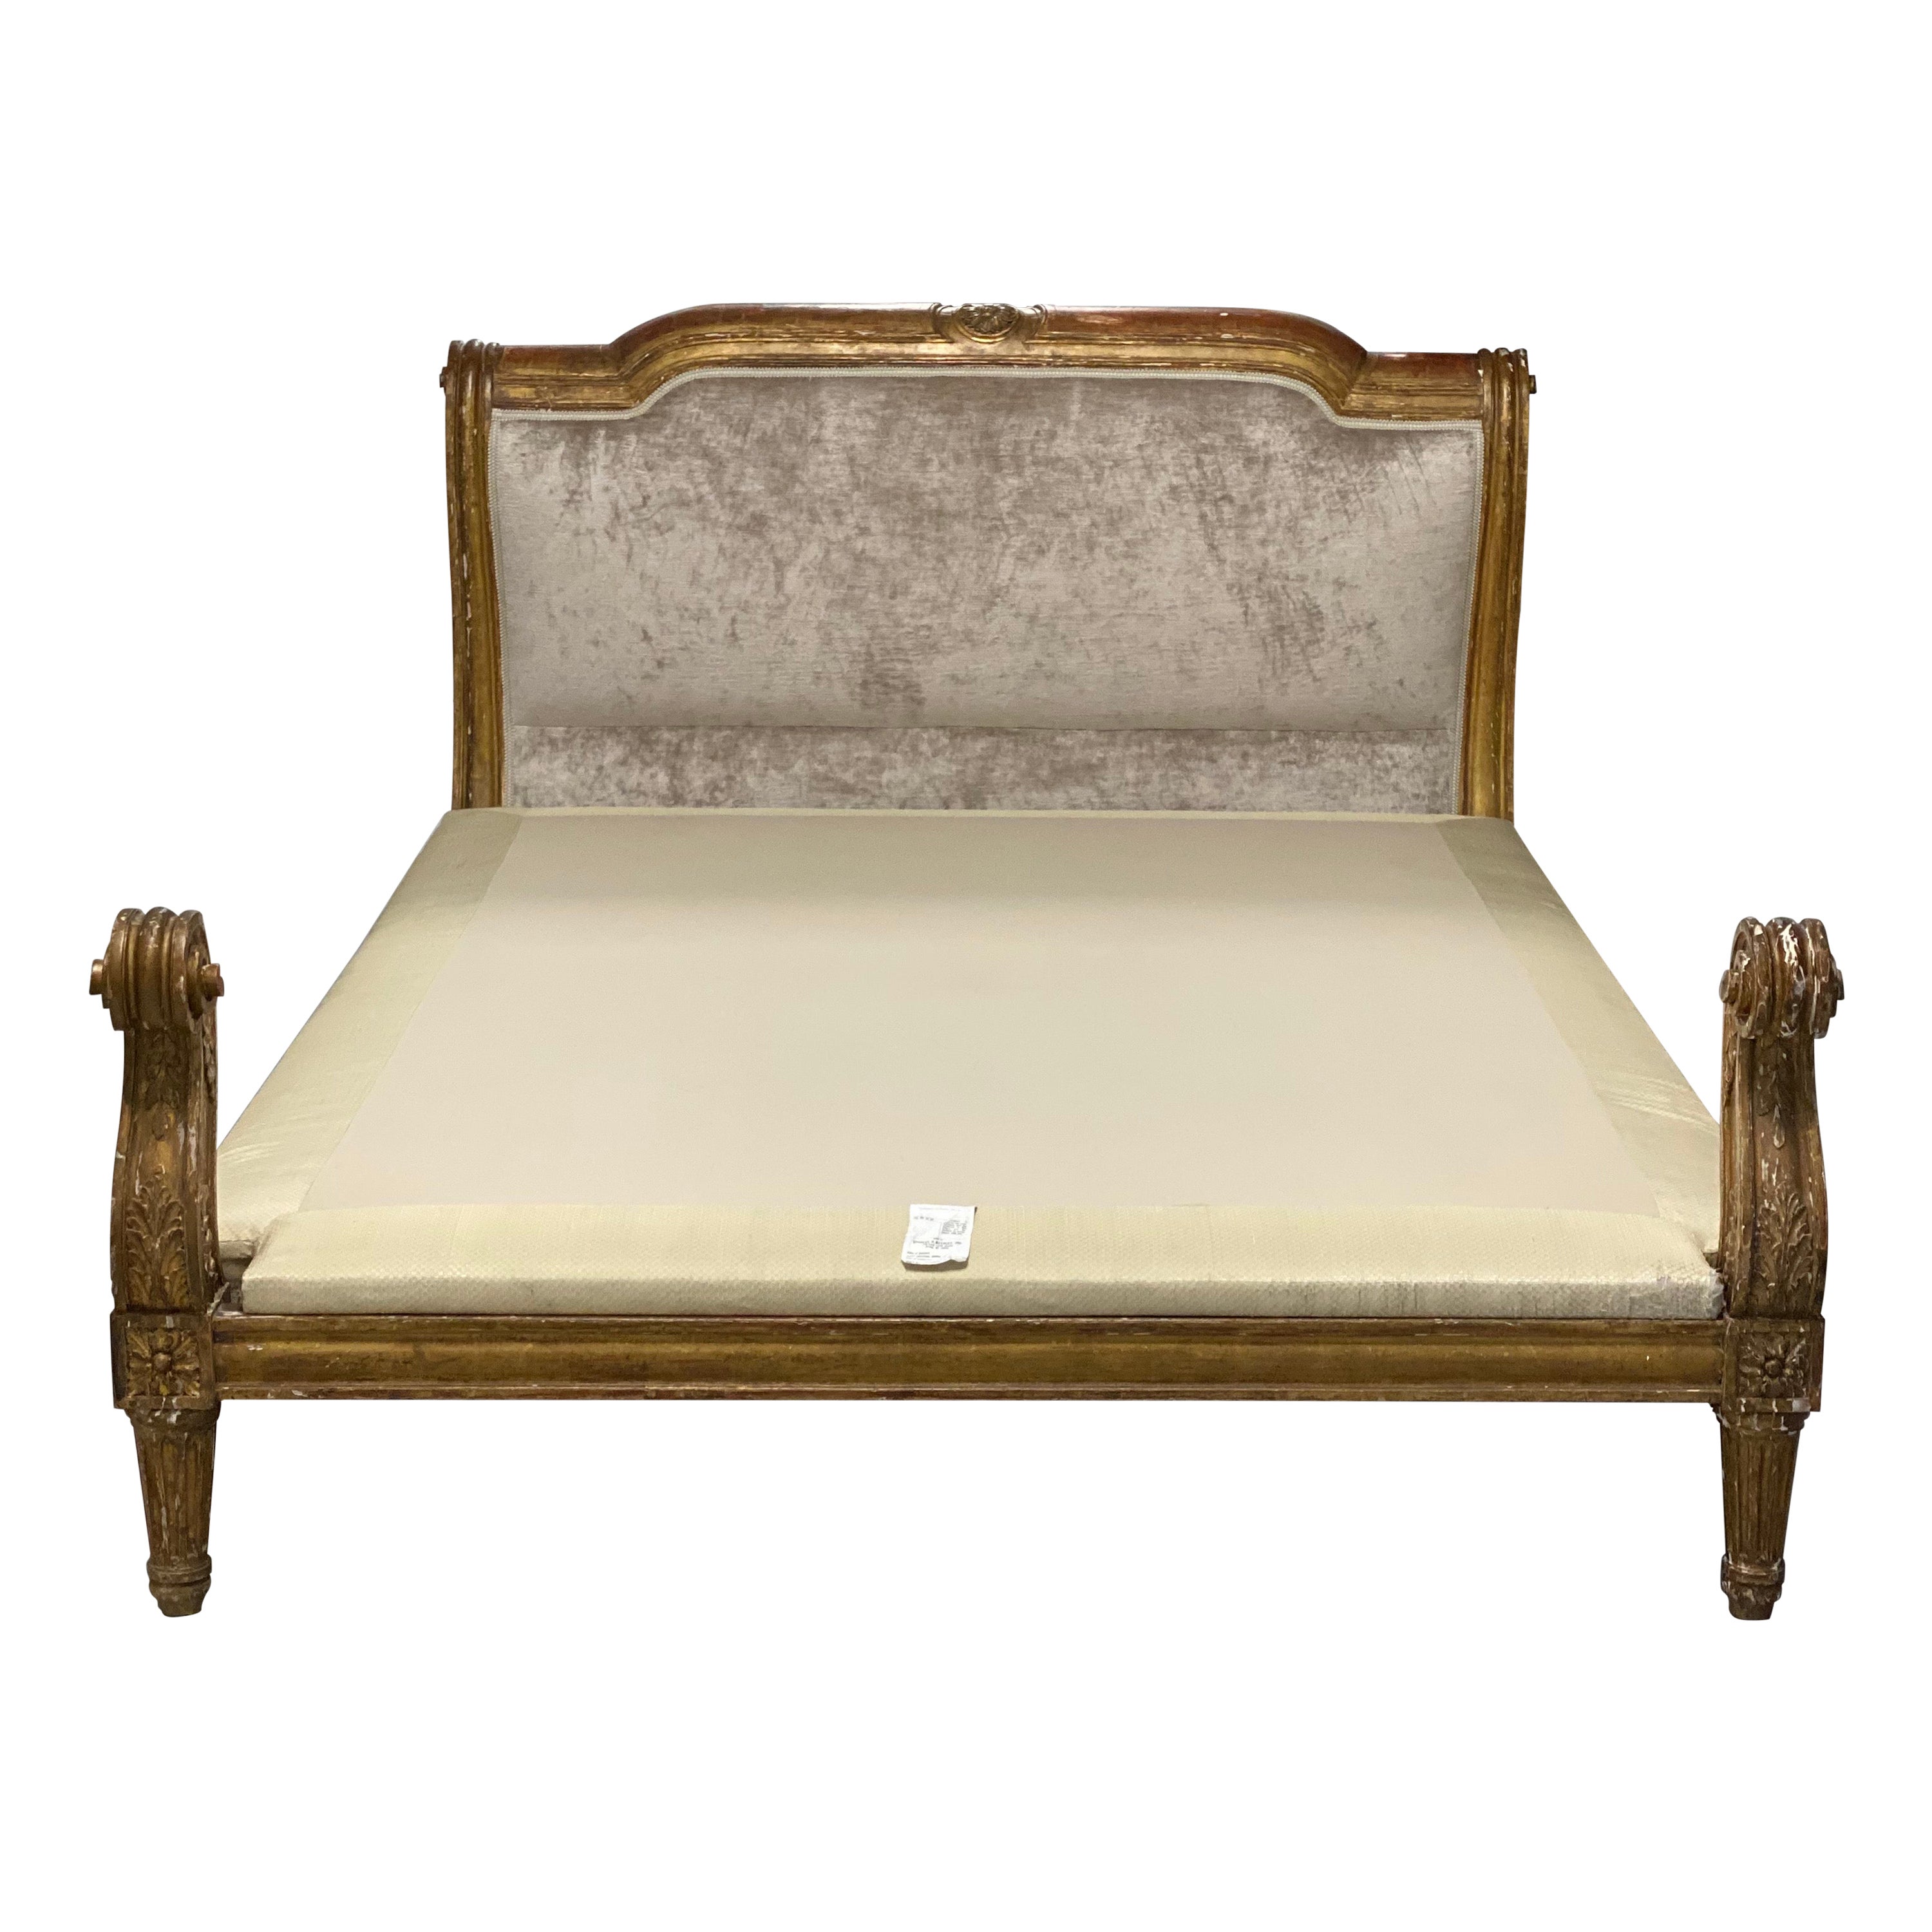 19th C. French Gilt-Wood Customized Queen Sleigh Bed with Mattress, David Easton For Sale